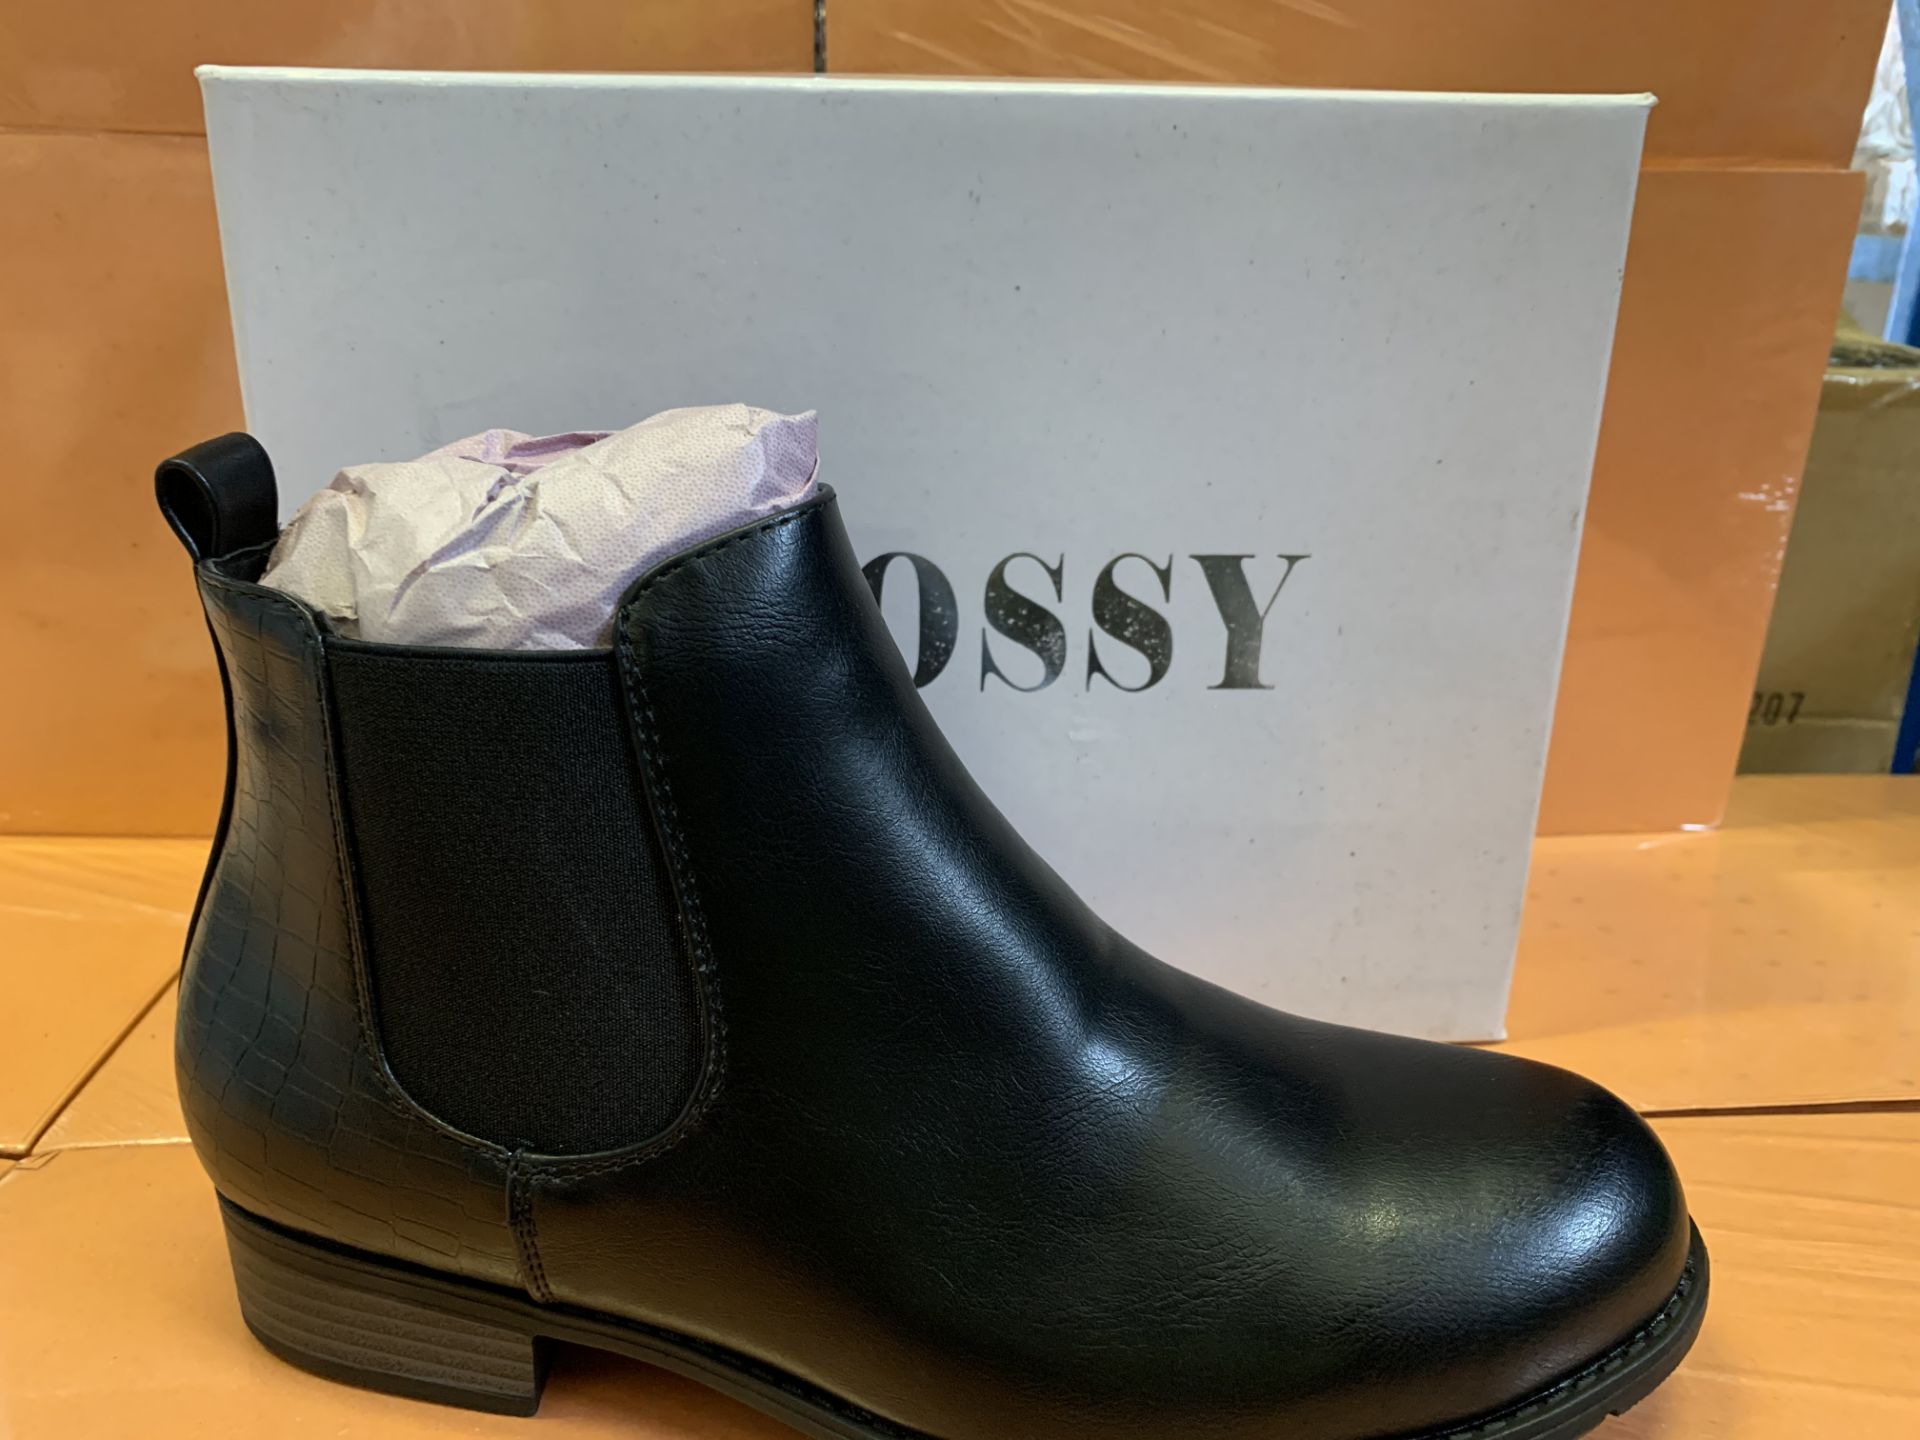 6 X BRAND NEW GLOSSY FASHION BOOTS IN VARIOUS SIZES